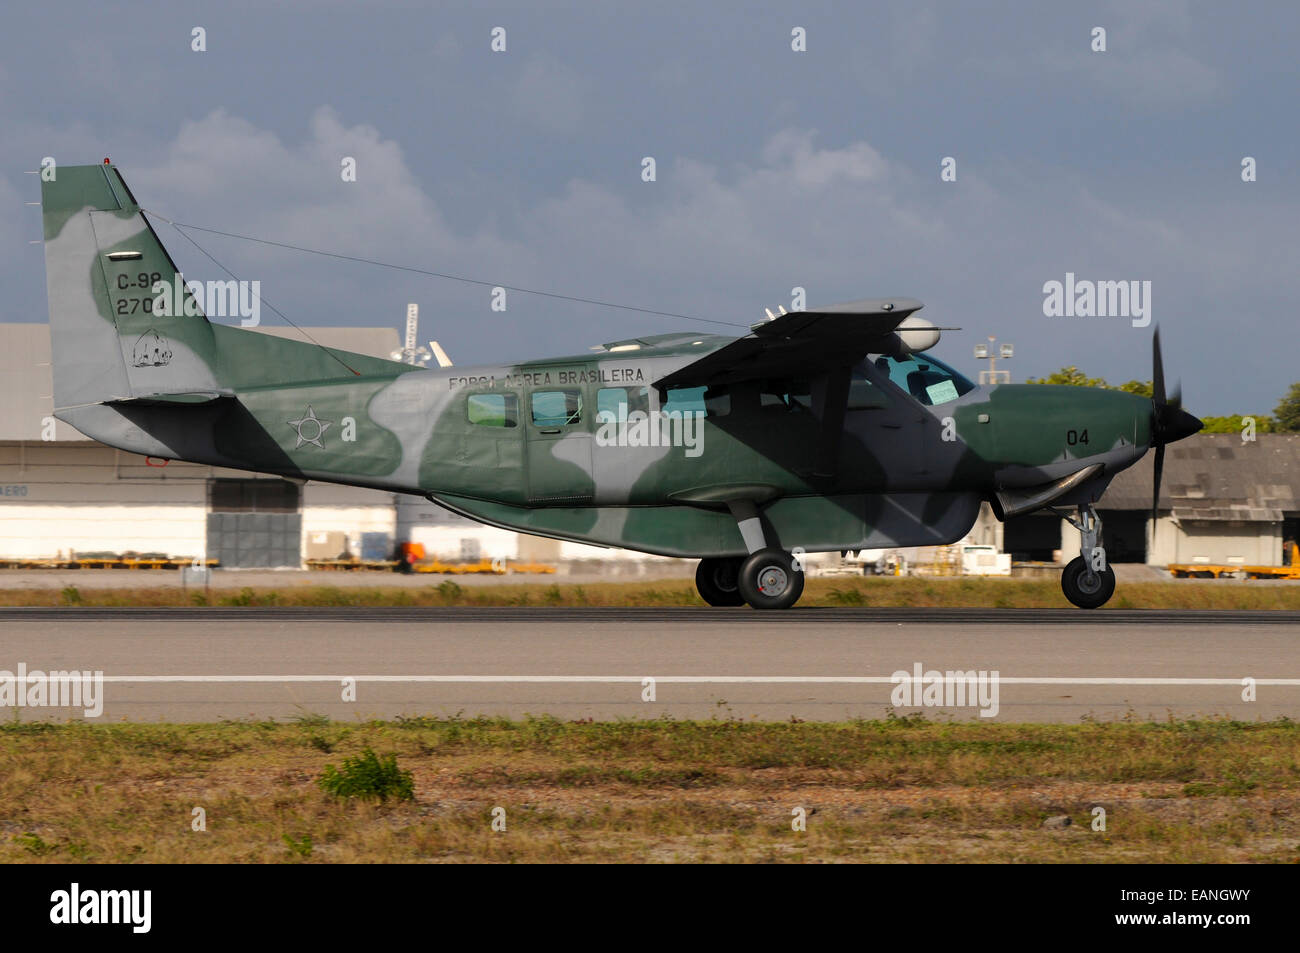 Brazilian Air Force C-98 (Cessna 208 Caravan) taking off from Natal Air Force Base, Brazil. Stock Photo